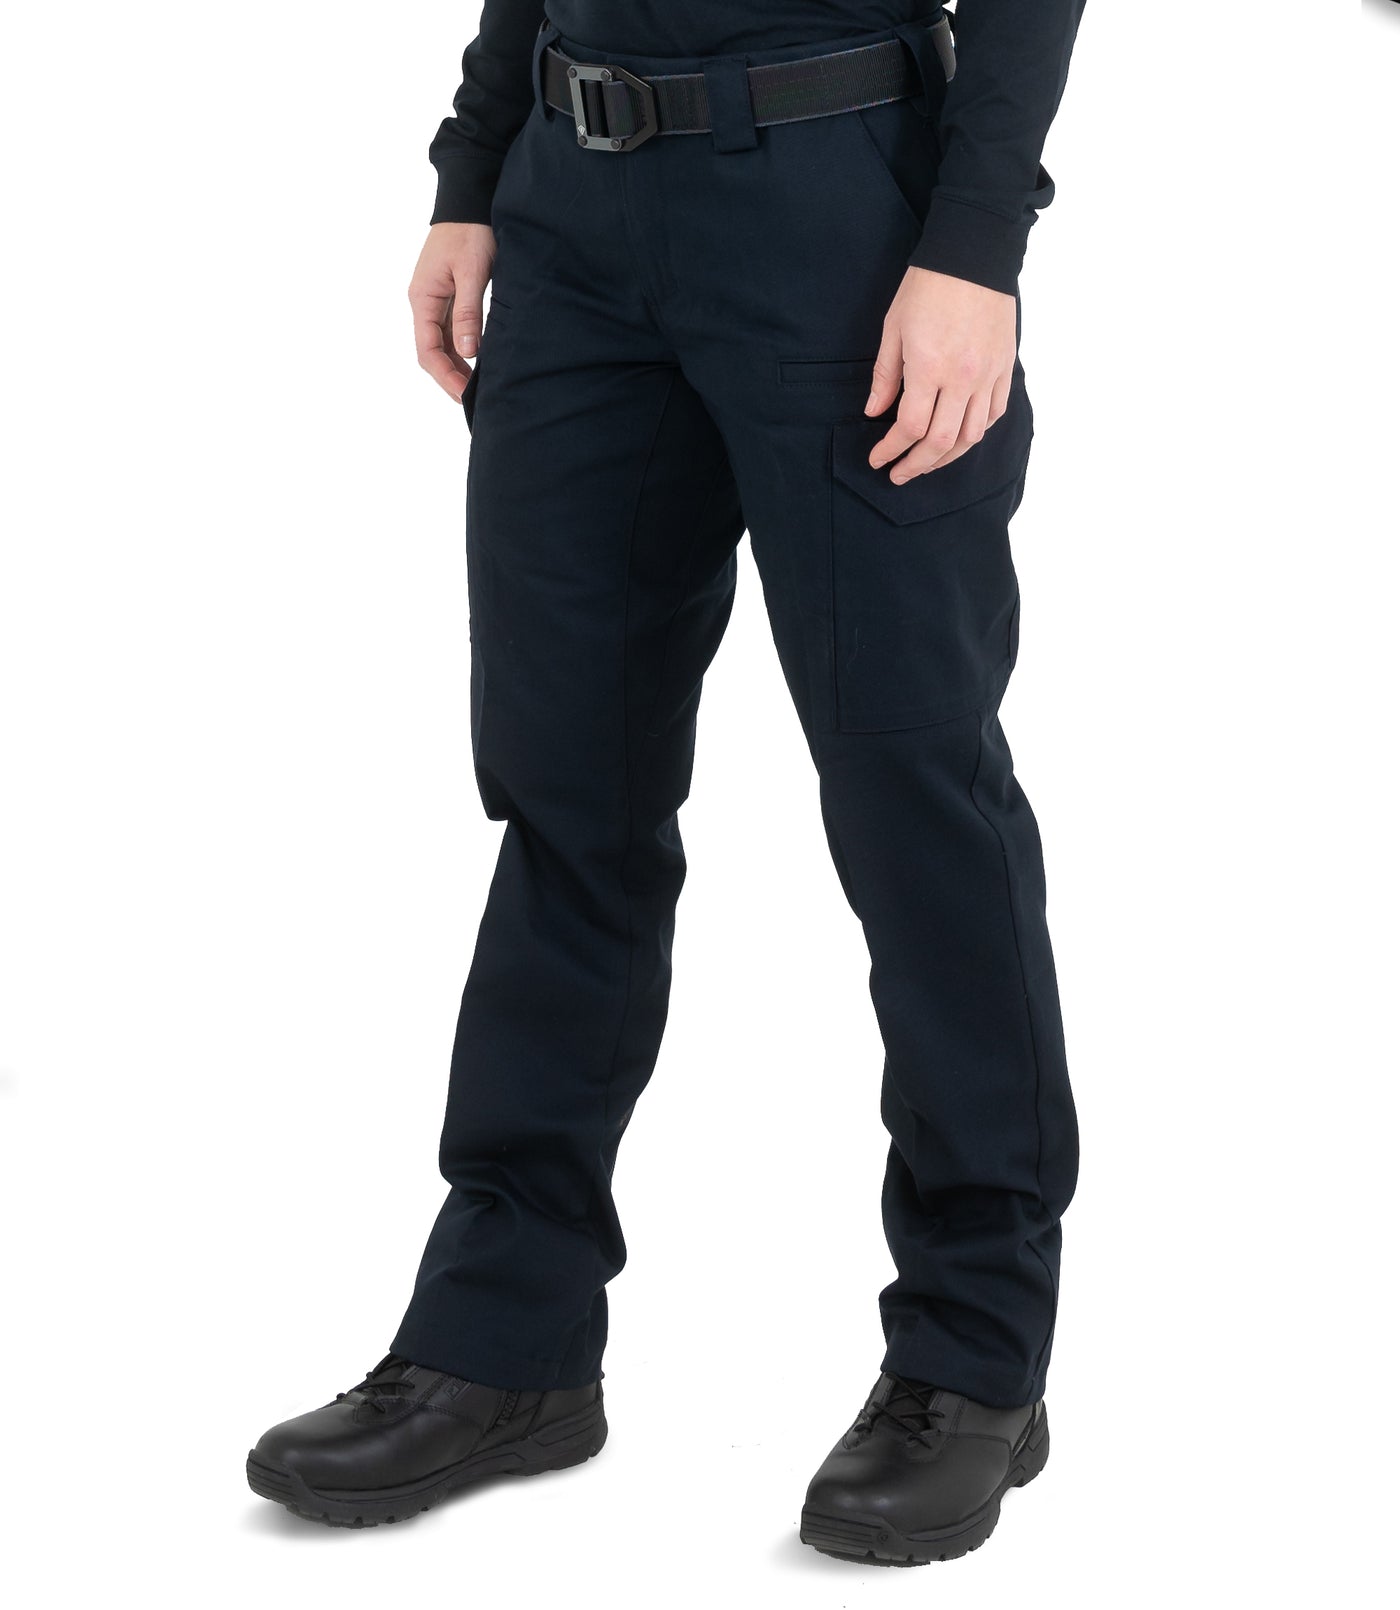 Women's Cotton Cargo Station Pant – First Tactical